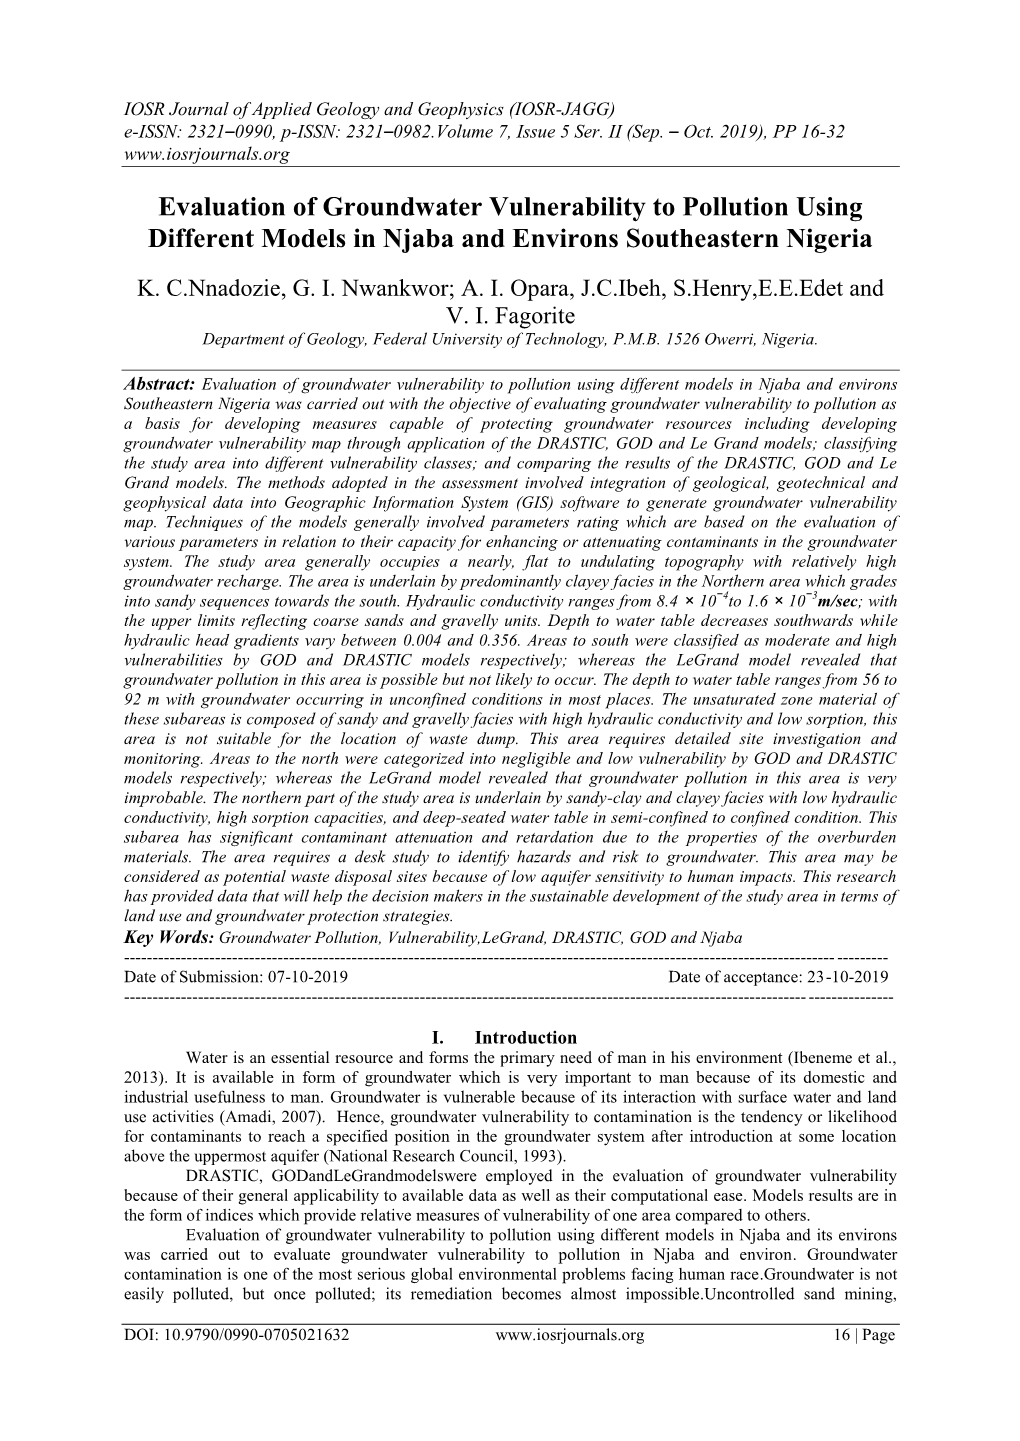 Evaluation of Groundwater Vulnerability to Pollution Using Different Models in Njaba and Environs Southeastern Nigeria